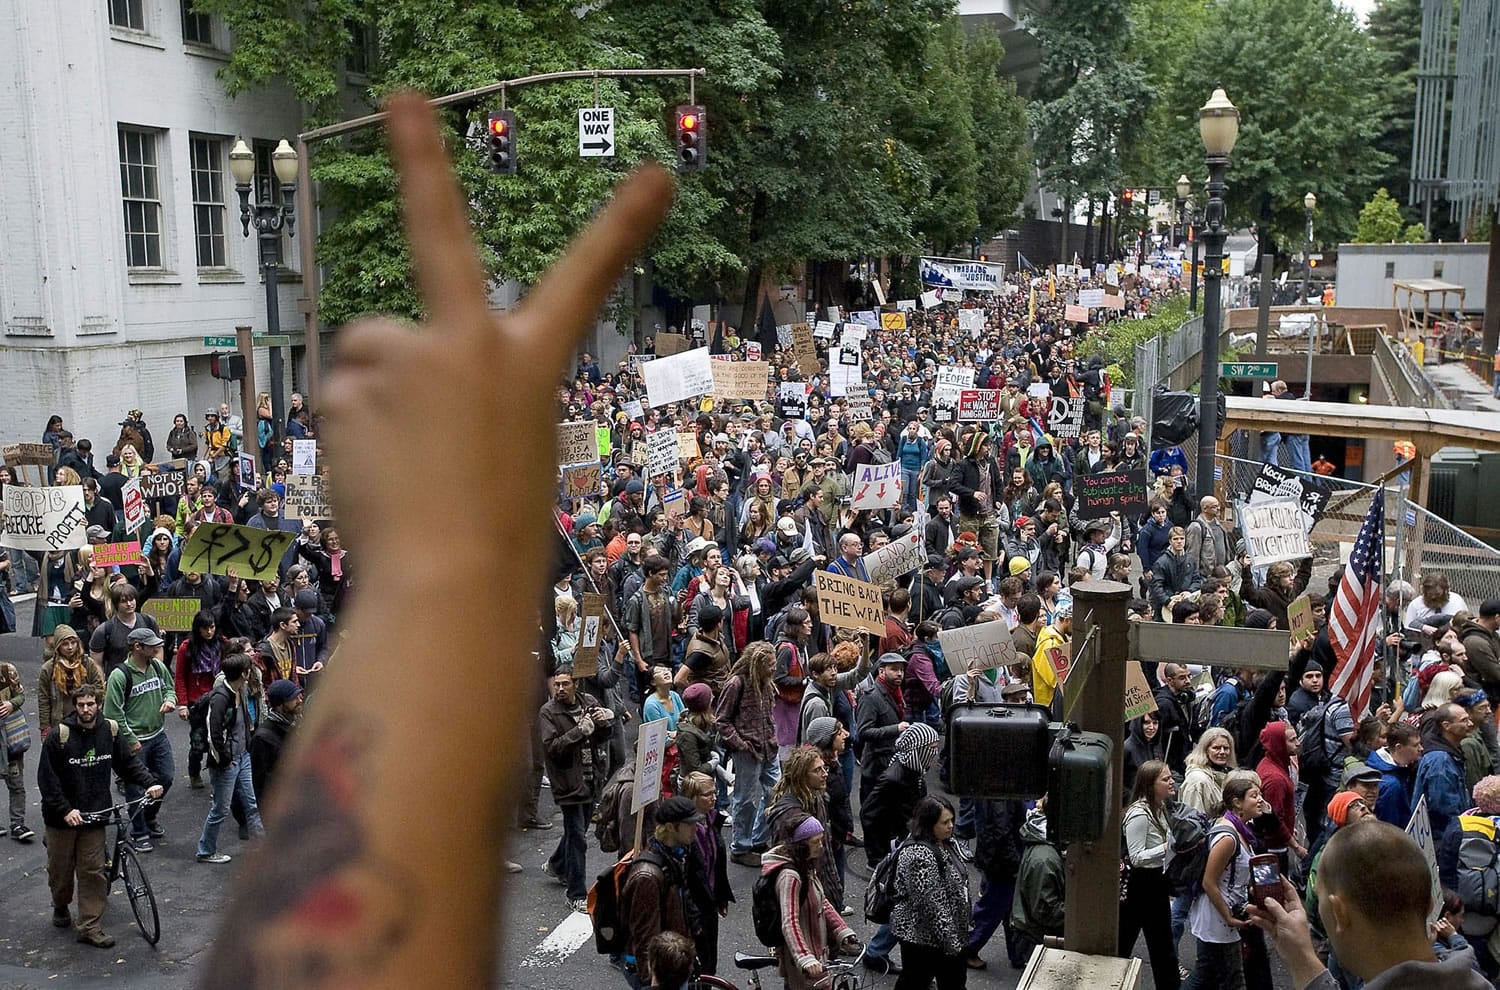 Pam Hogeweide, of Portland, throws up a peace sign, foreground, as protesters march north on SW Second Avenue from SW Jefferson Street in downtown Portland in solidarity with the national protests against wall street bailouts and corporate greed on Thursday October 6, 2011.